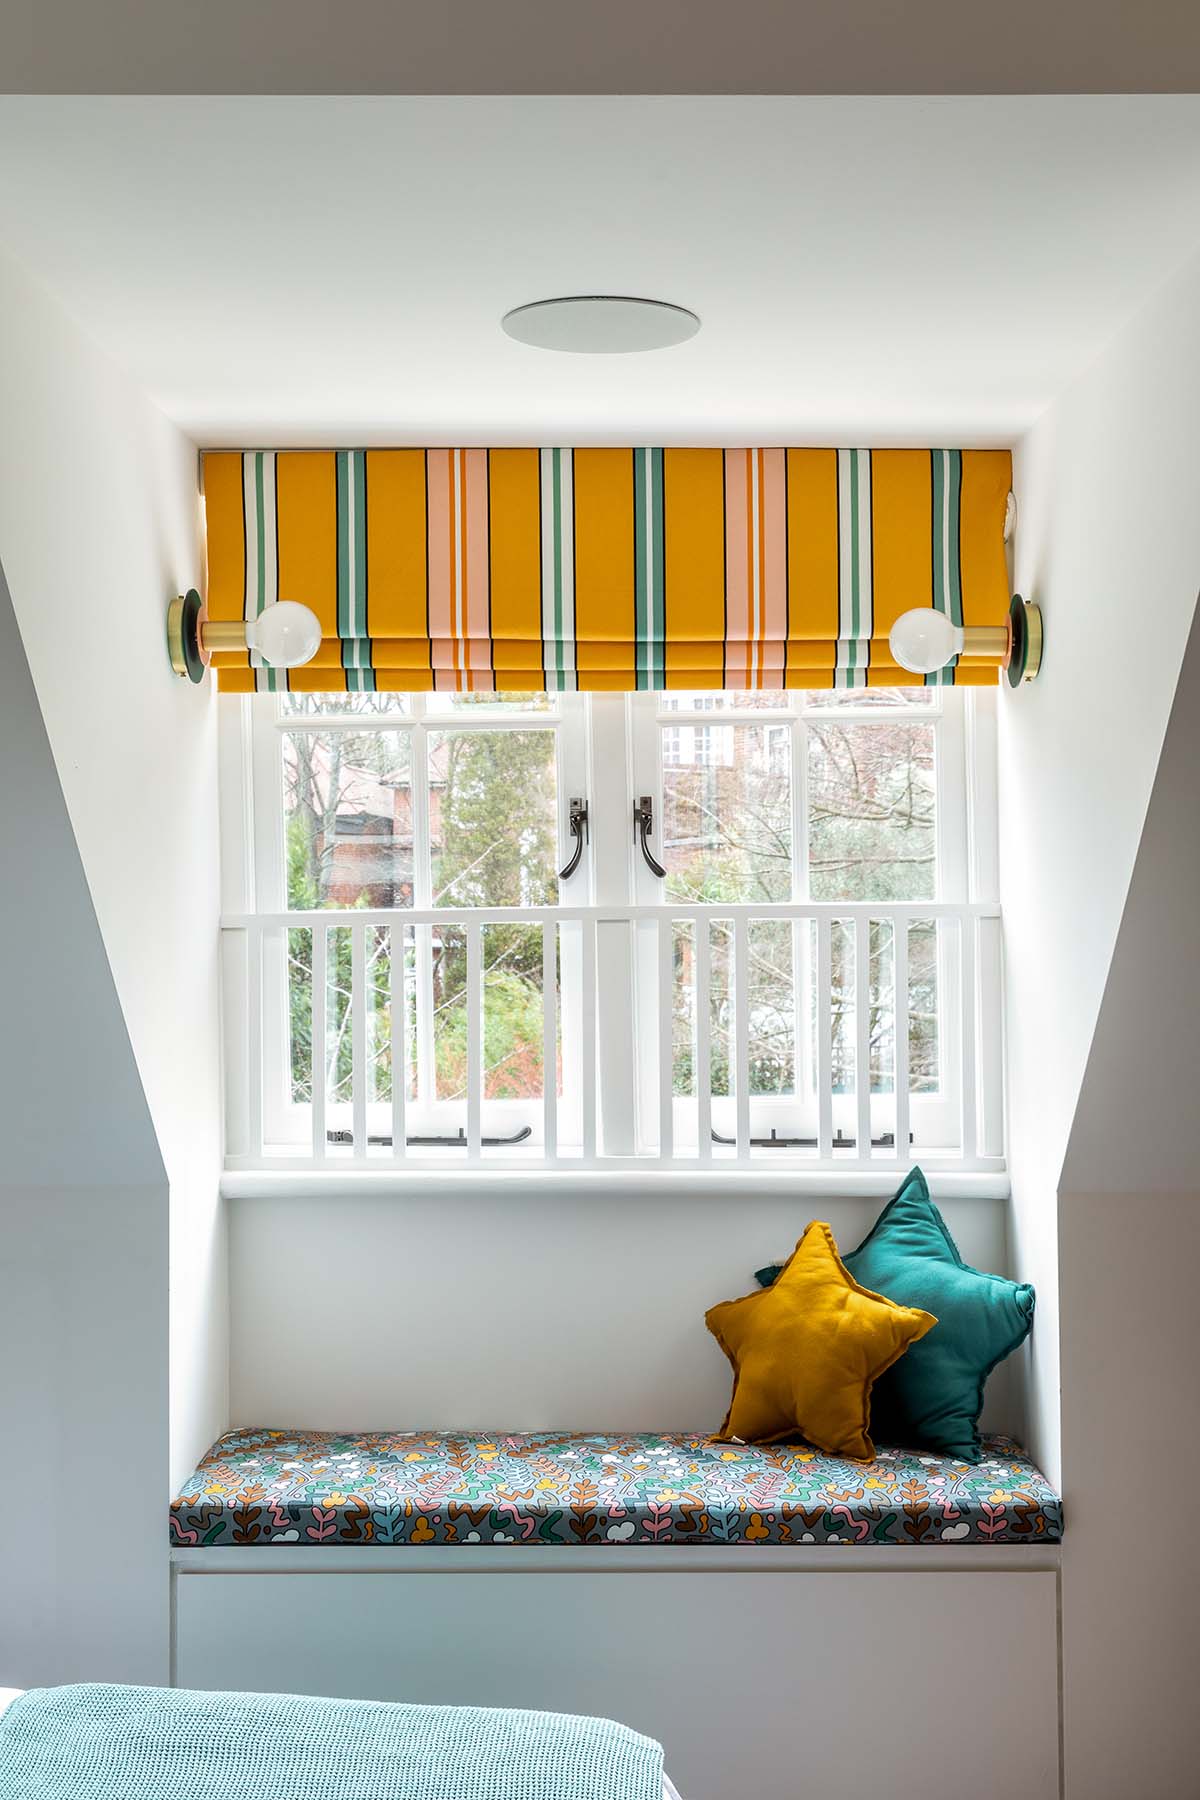 A children's room with a stripy roman blind and star cushions, designed by Mia Karlsson